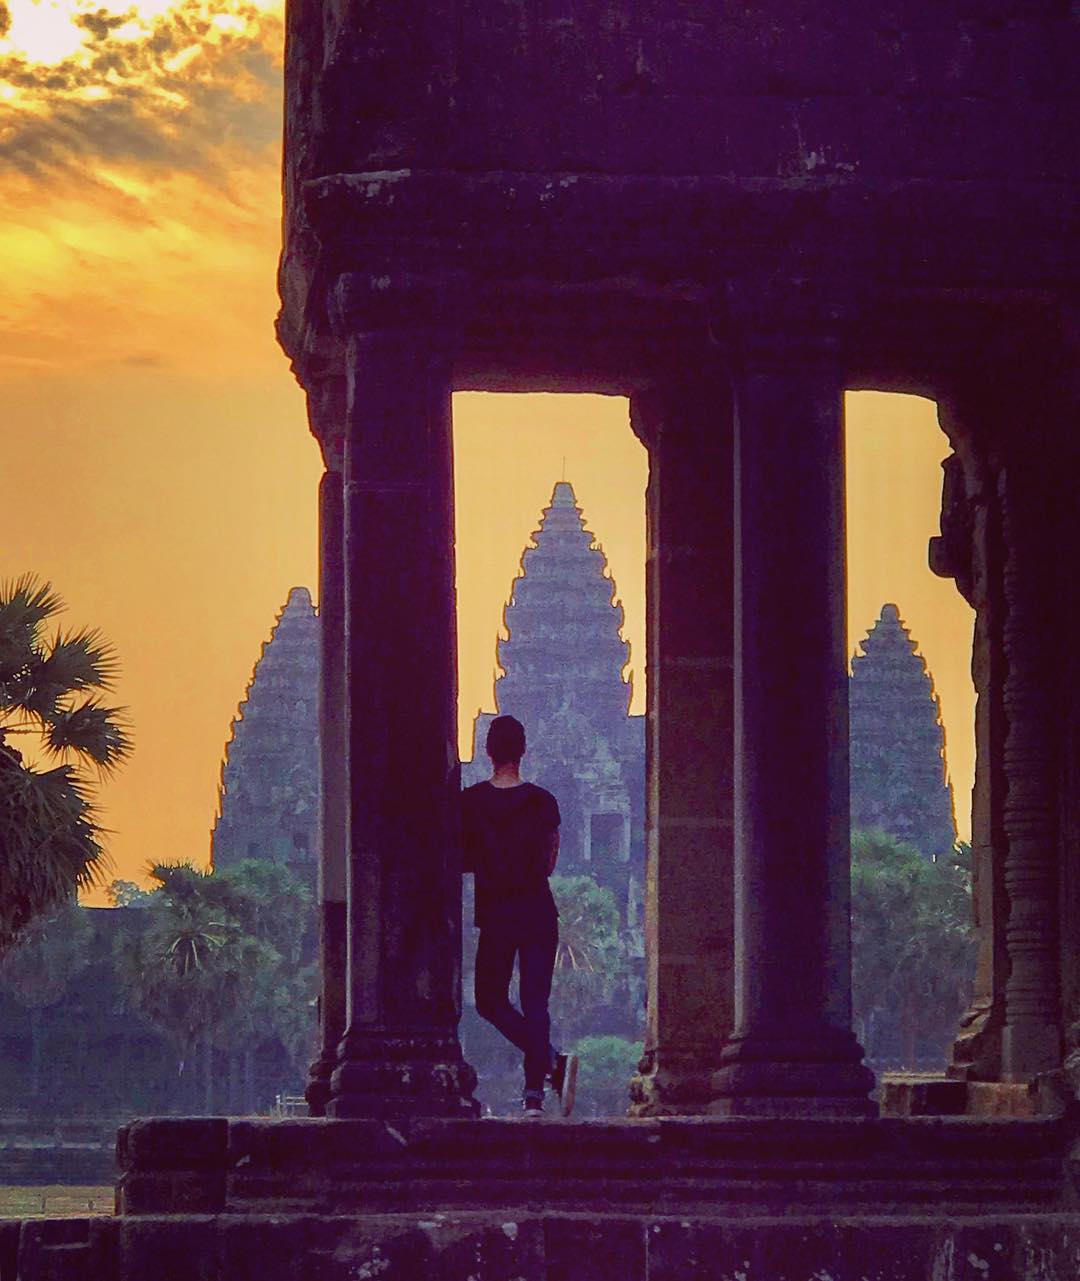 [Test] Watch the Sunrise Over Angkor Watt & X Other Things M'sians Should Have on Their Bucket List - WORLD OF BUZZ